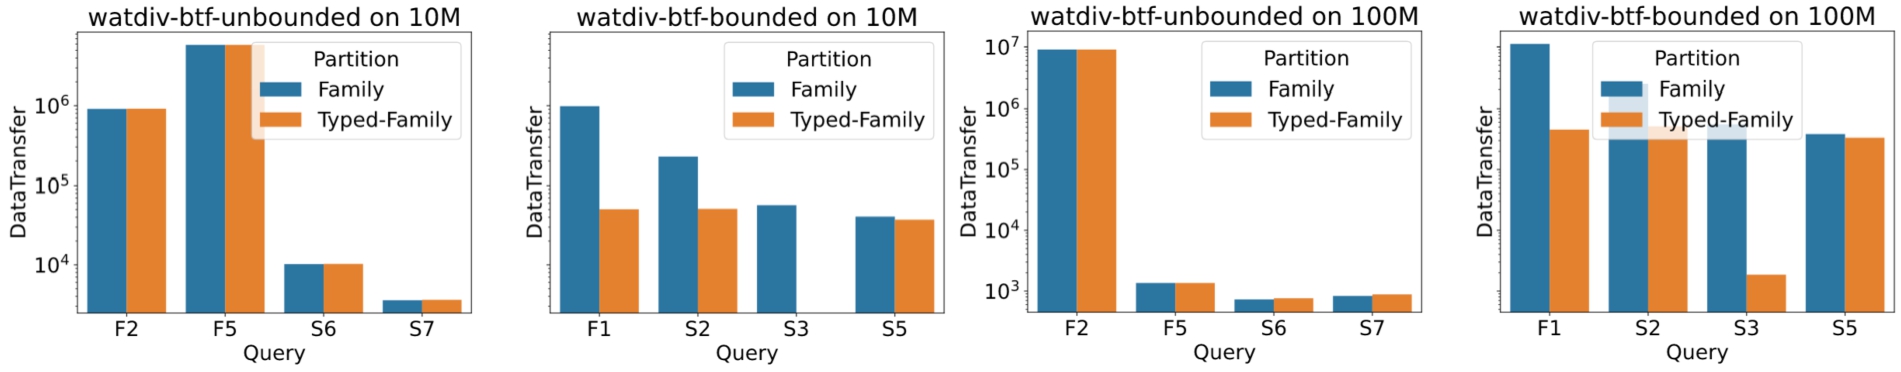 Data transferred per query (in bytes) over watdiv10M and watdiv100M on watdiv-btfunbounded and watdiv-btfbounded workloads.